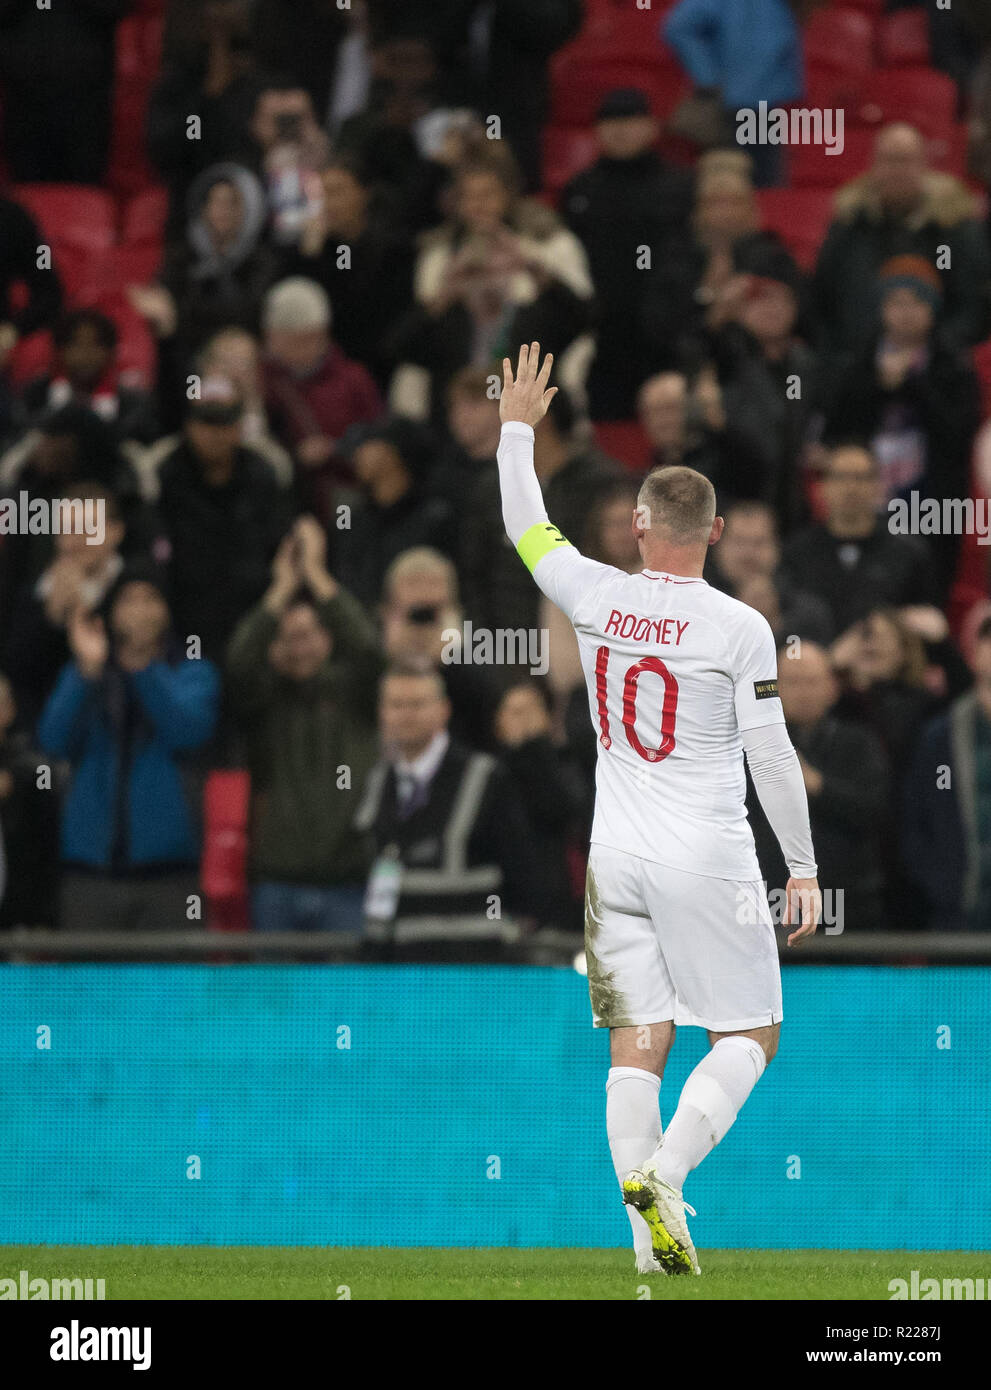 London, UK. 15th November, 2018. Wayne Rooney (D.C. United) of England waves goodbye during the International friendly match between England and USA at Wembley Stadium, London, England on 15 November 2018. Photo by Andy Rowland. . (Photograph May Only Be Used For Newspaper And/Or Magazine Editorial Purposes. www.football-dataco.com) Credit: Andrew Rowland/Alamy Live News Stock Photo